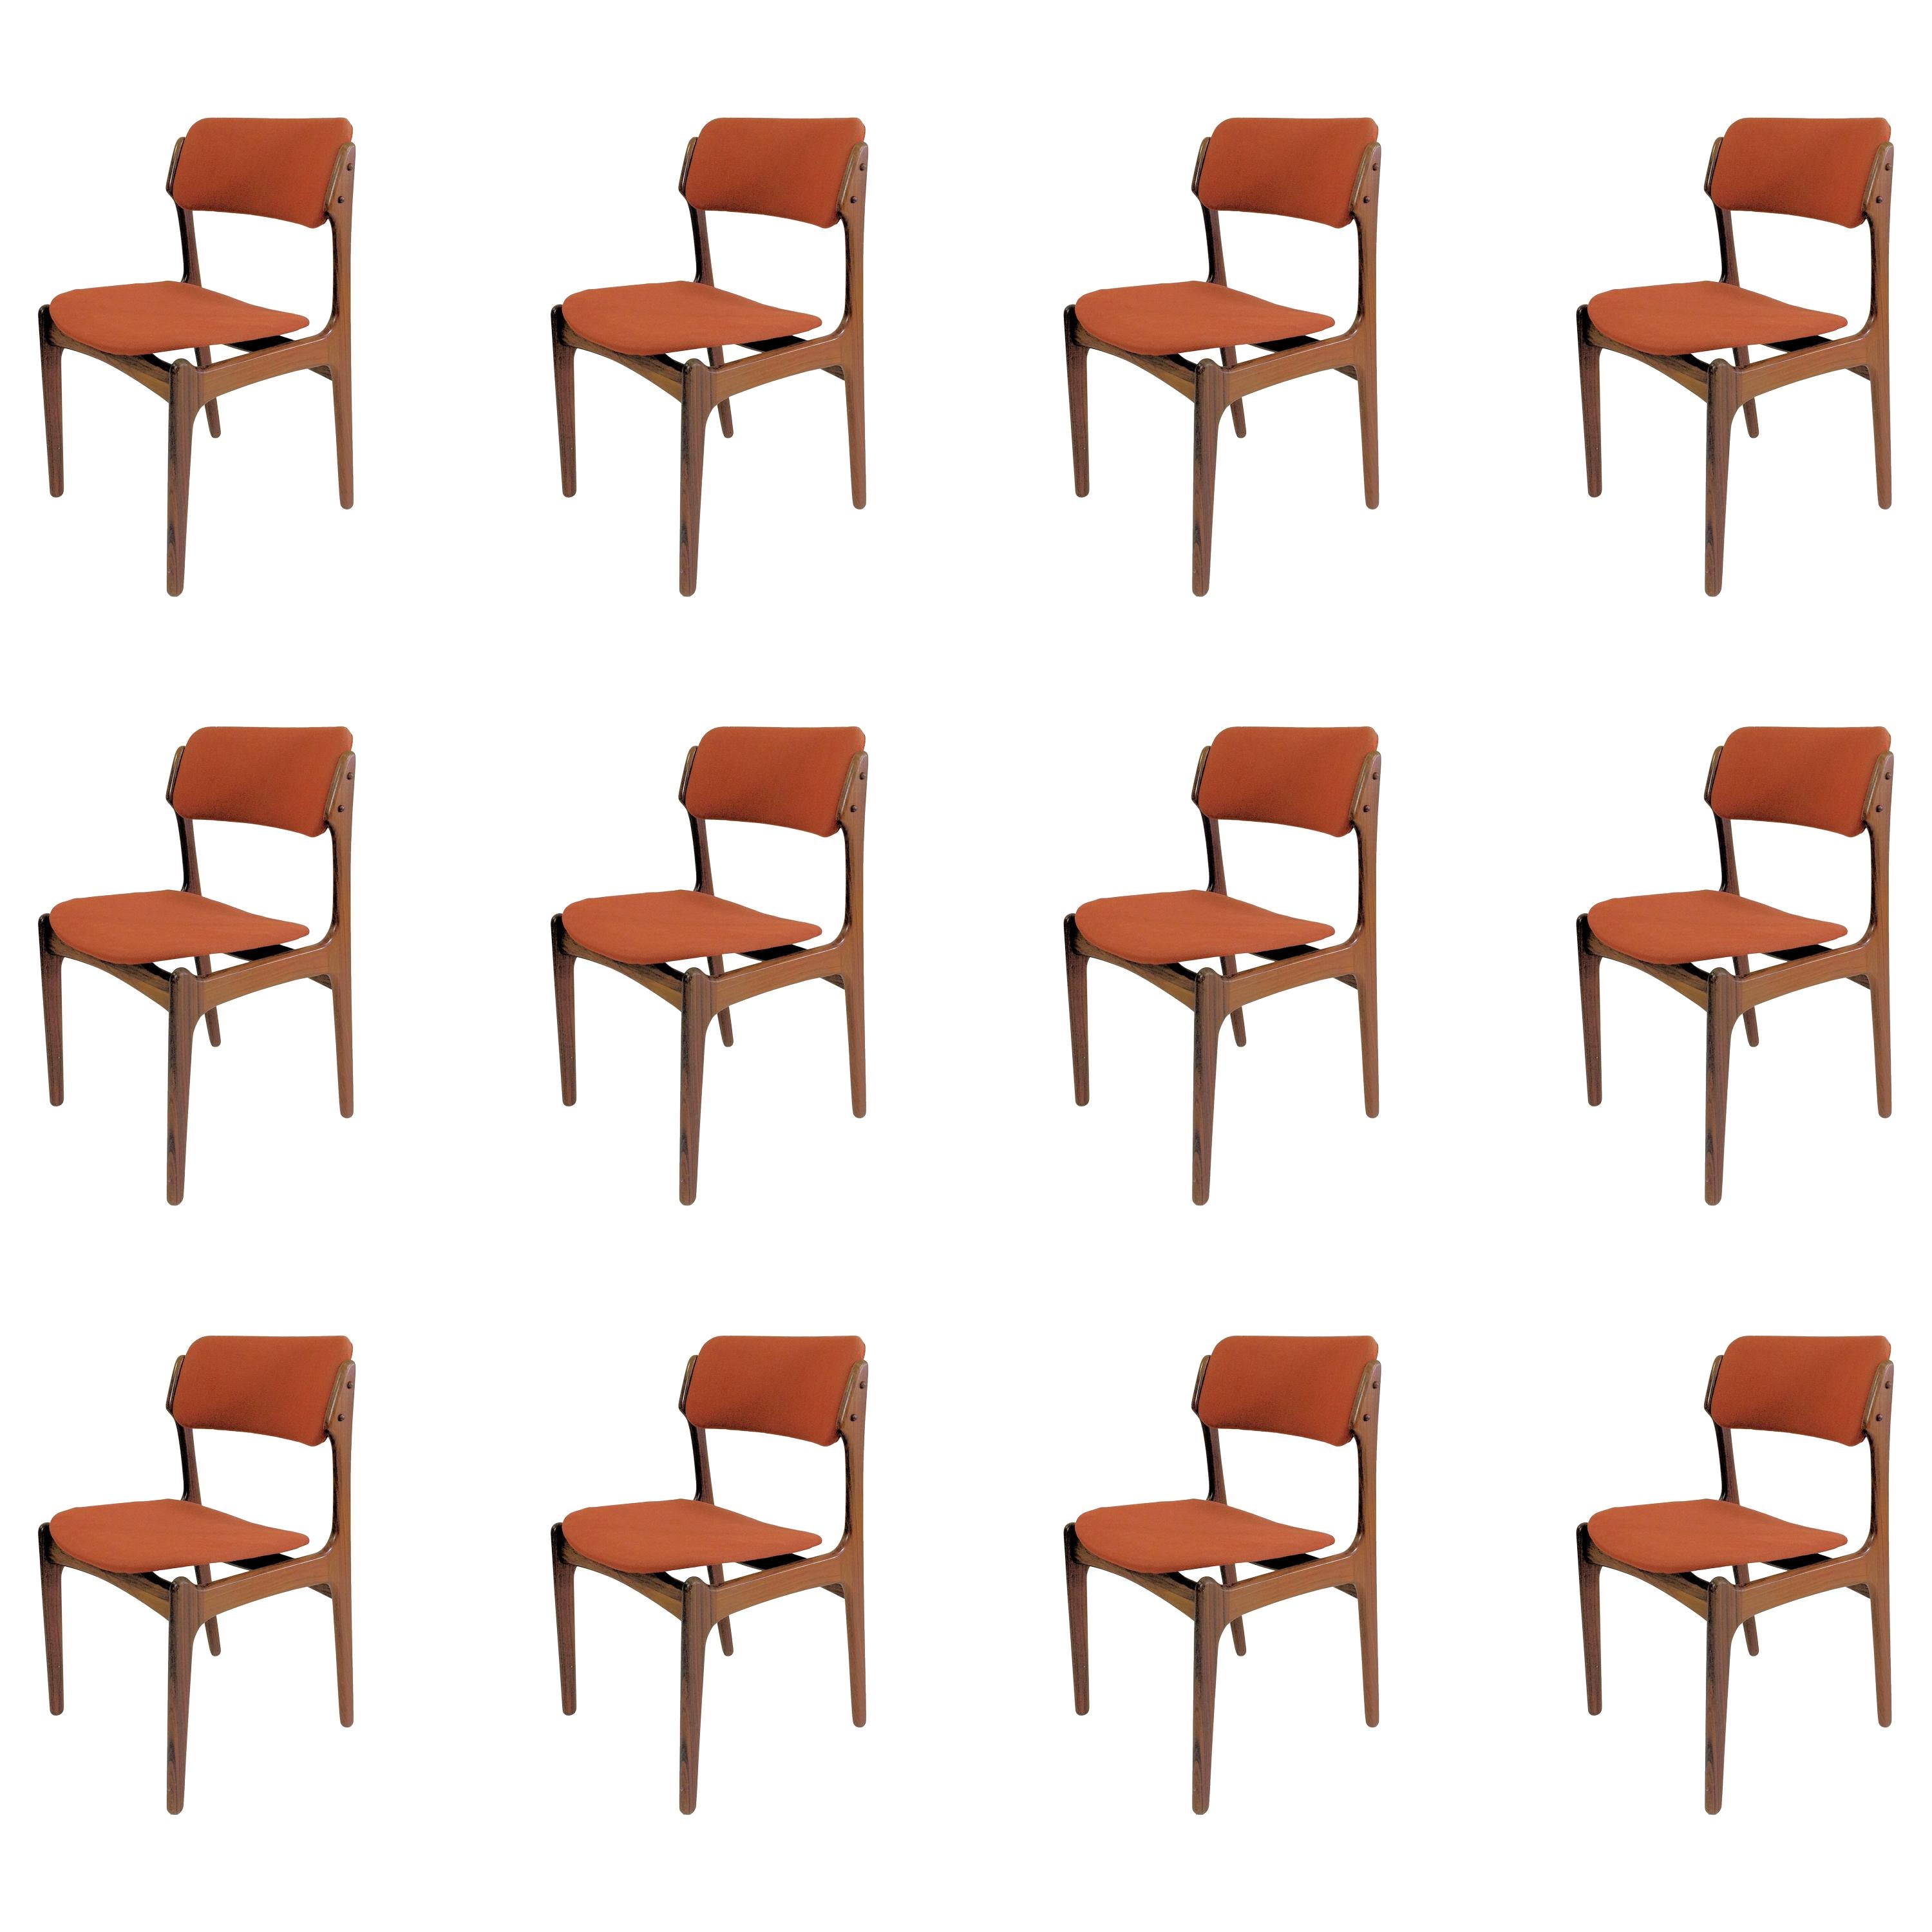 1960s Erik Buch Set of 12 Rosewood Dining Chairs by Oddense Maskinsnedkeri